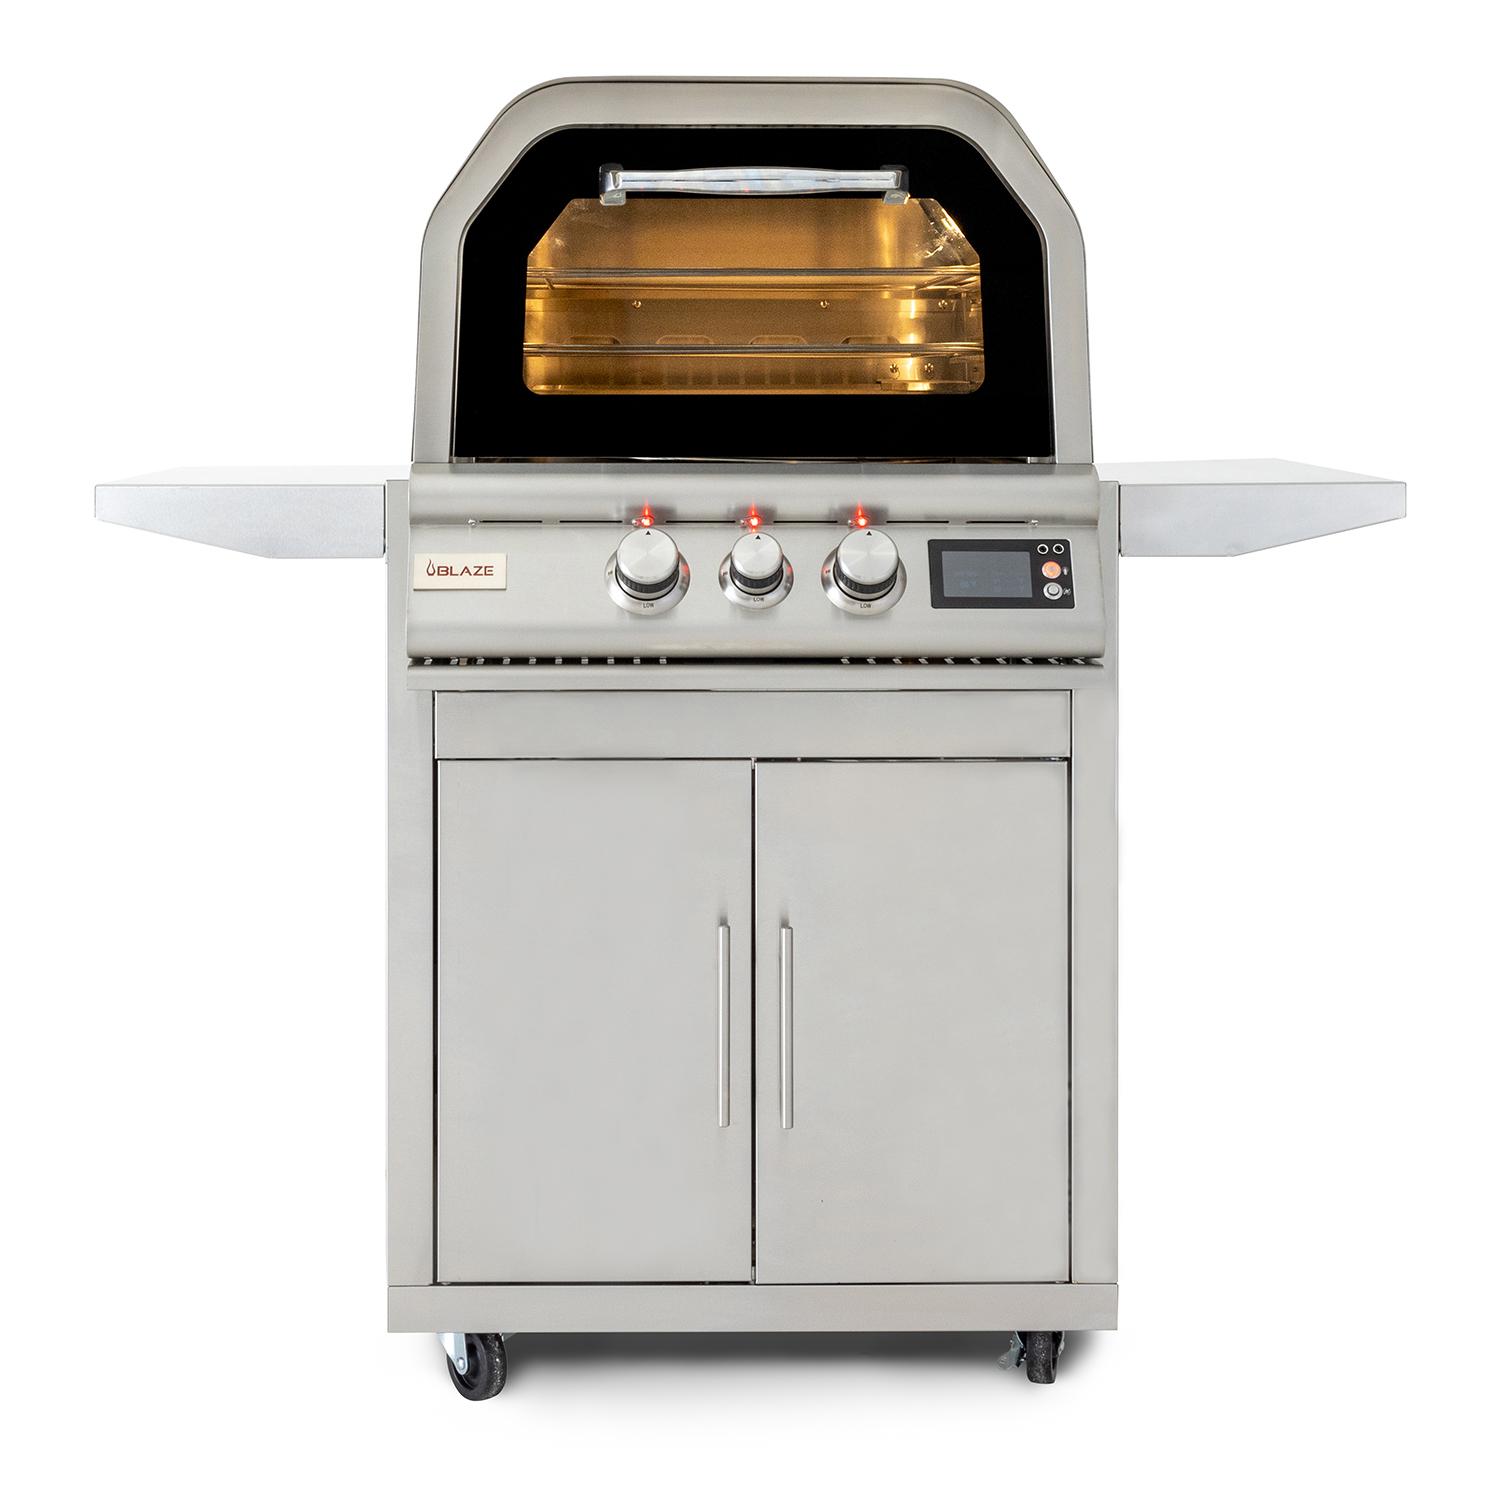 Blaze Grills BLZ26PZOVNNG Blaze 26-Inch Gas Outdoor Pizza Oven With Rotisserie, With Fuel Type - Natural Gas